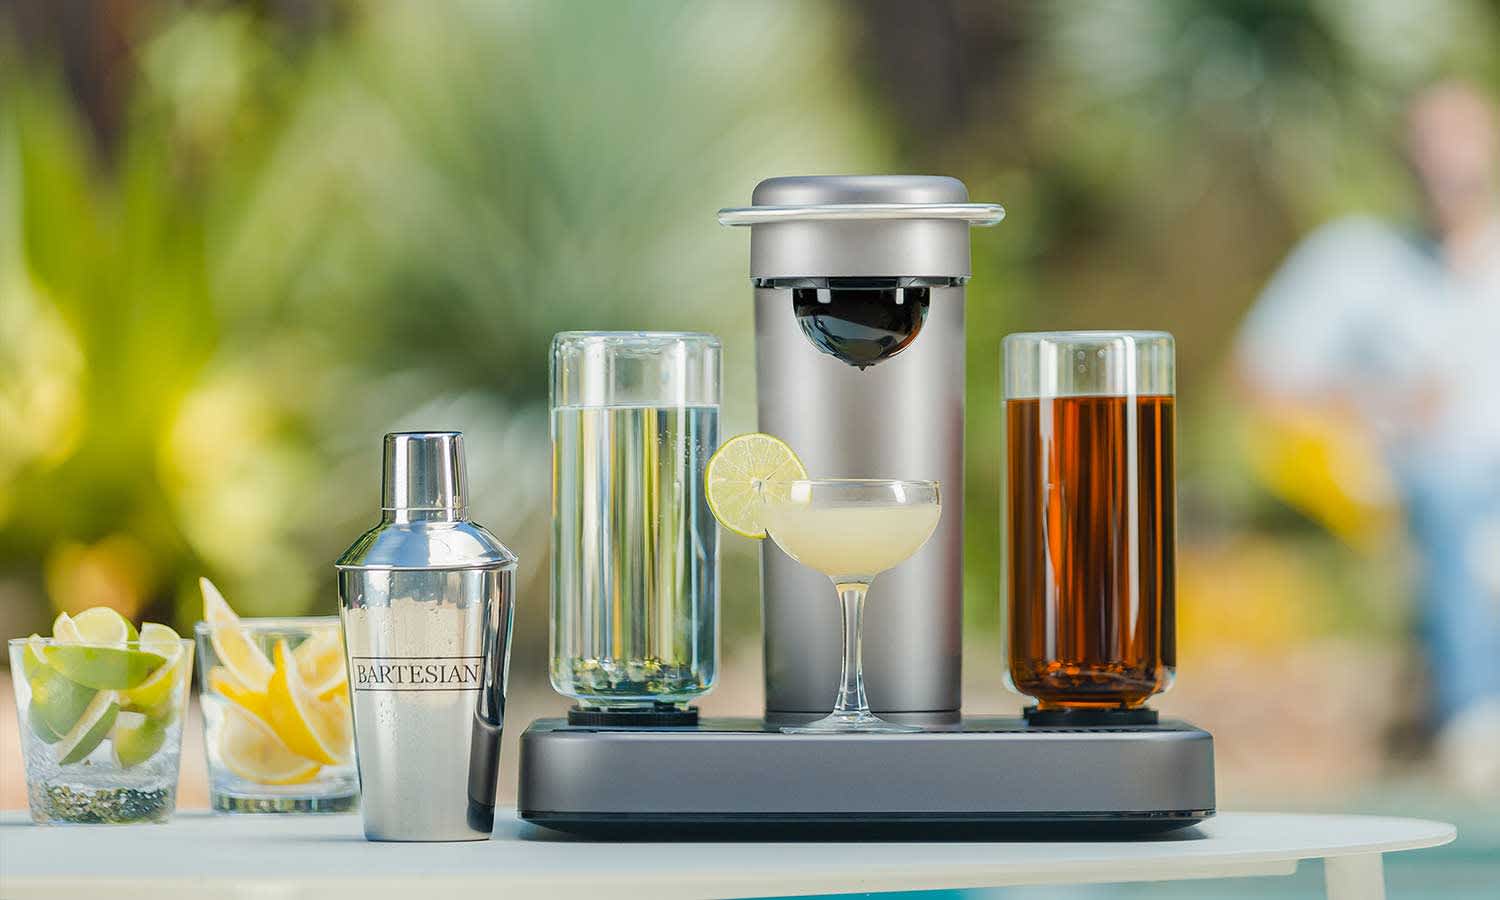 A Capsule Cocktail Machine Exists to Pour You Instant Margaritas — The Latch